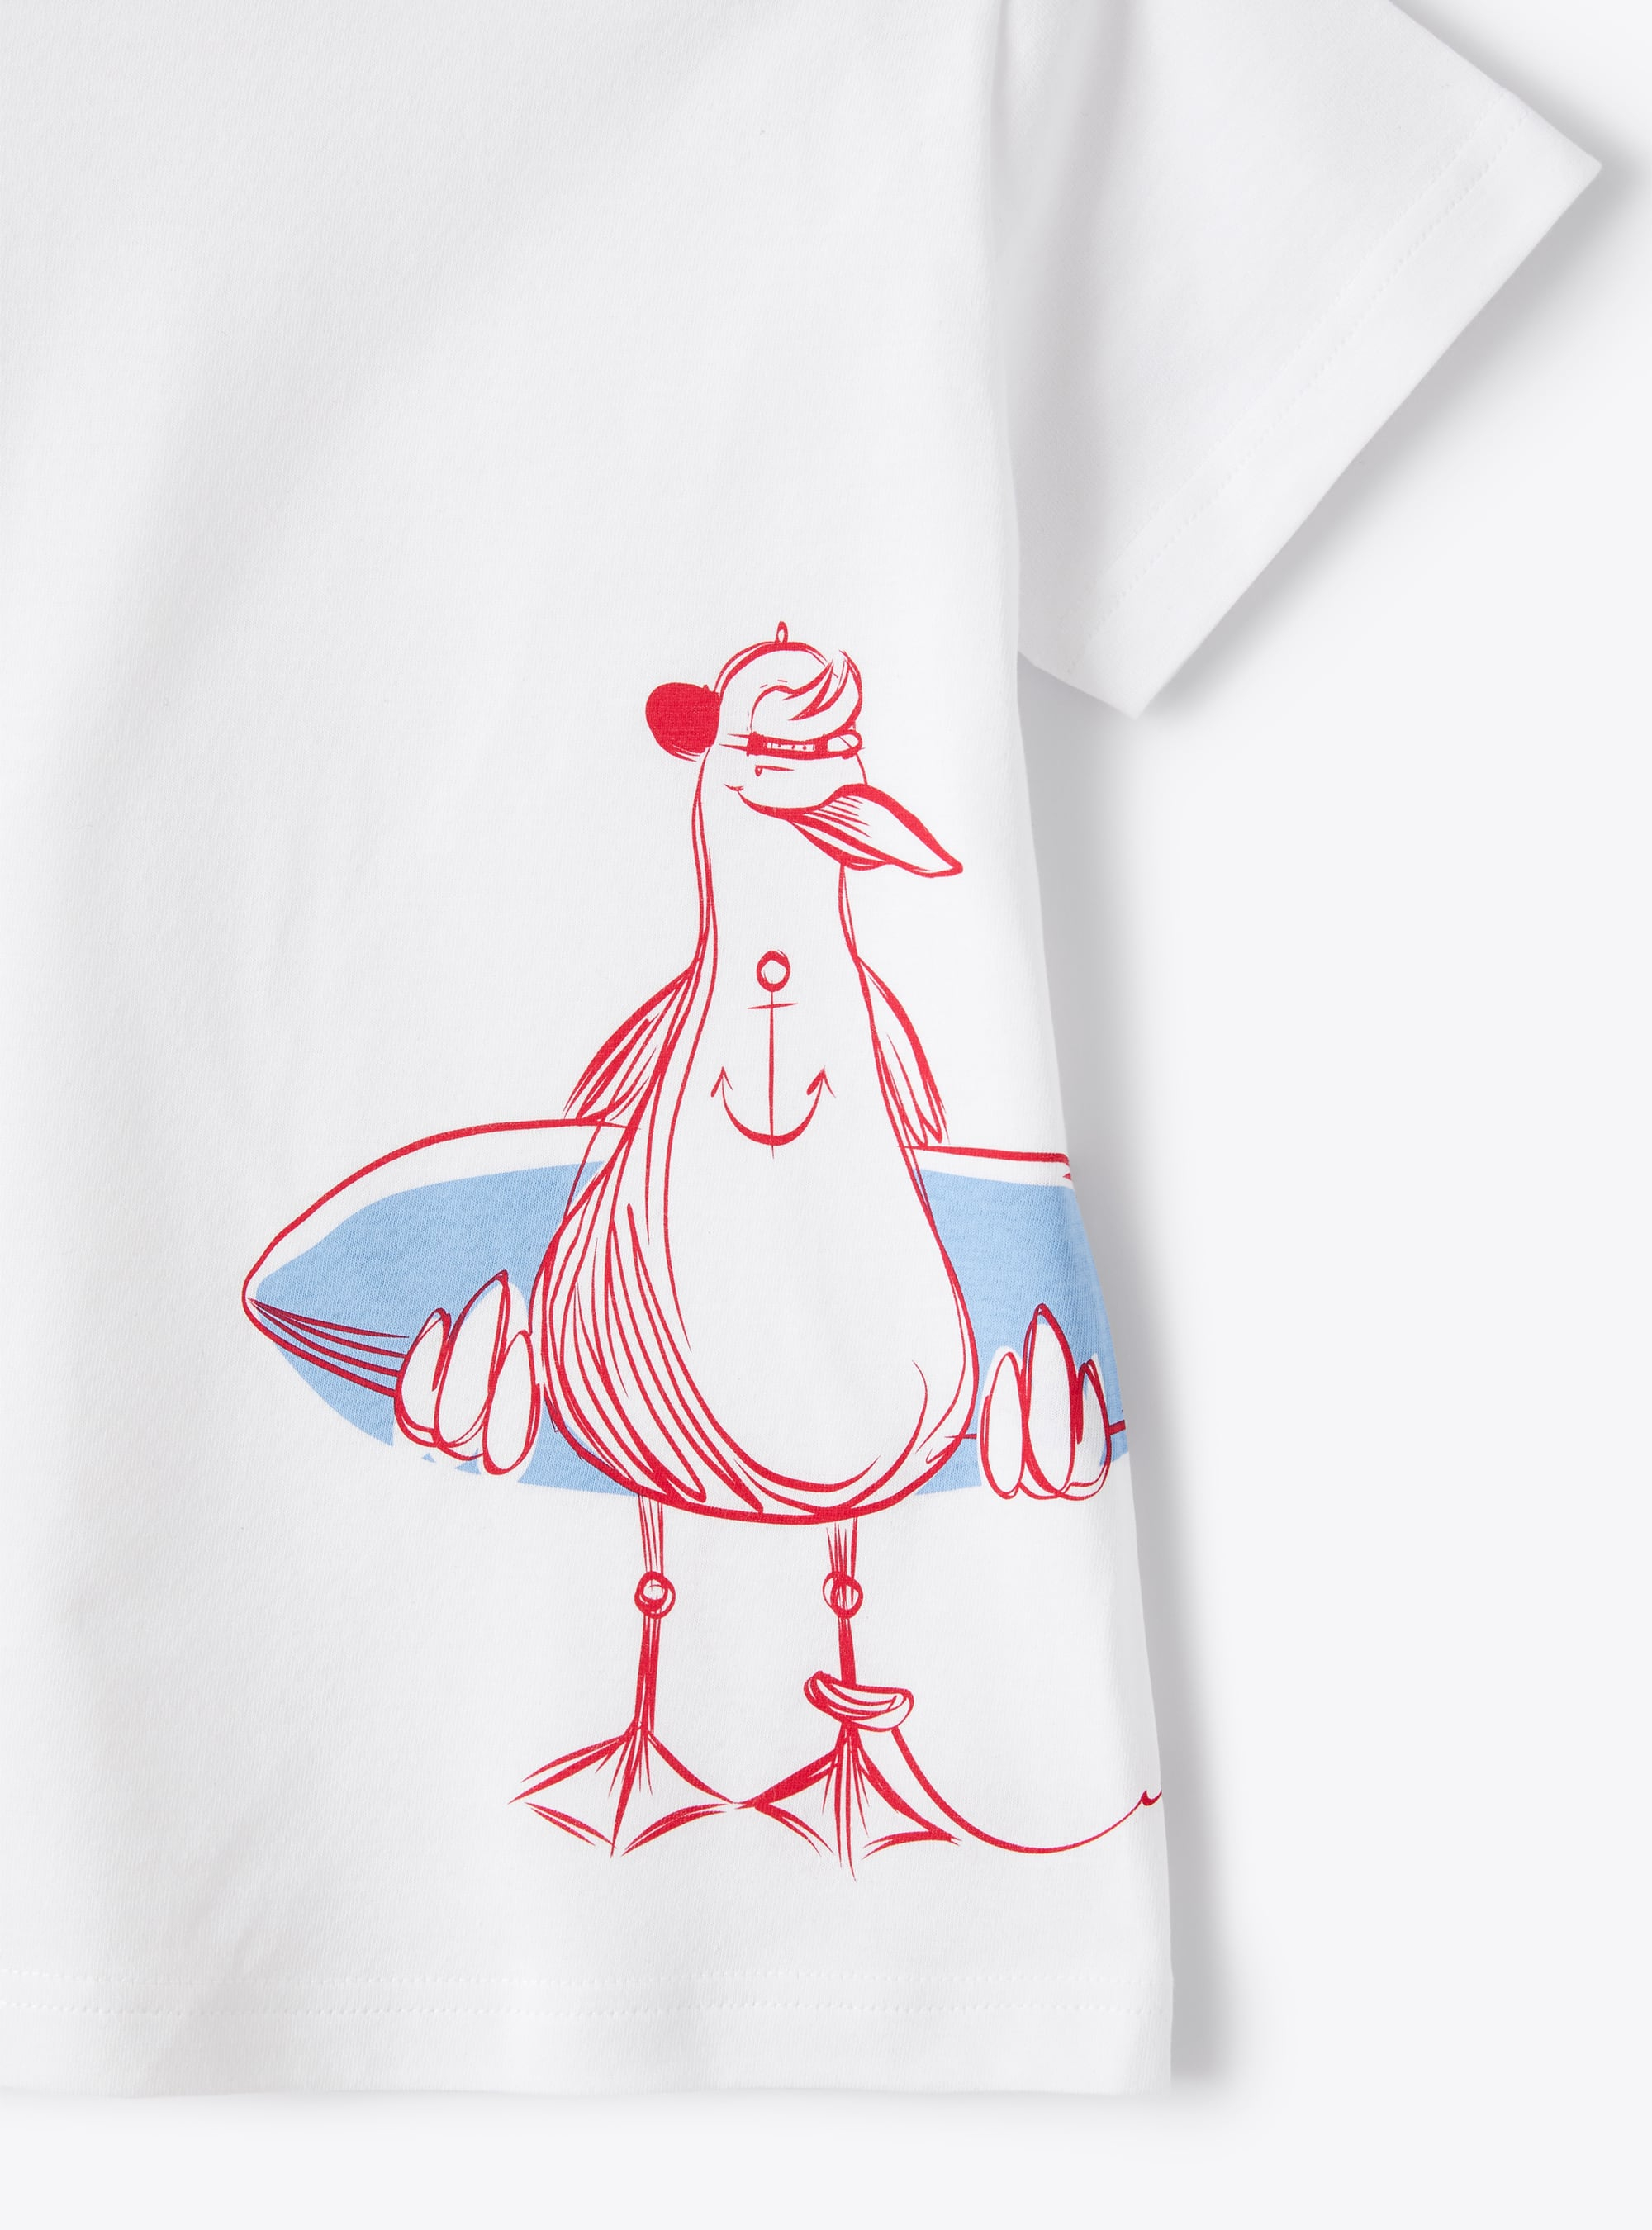 Jersey t-shirt with seagull print - White | Il Gufo